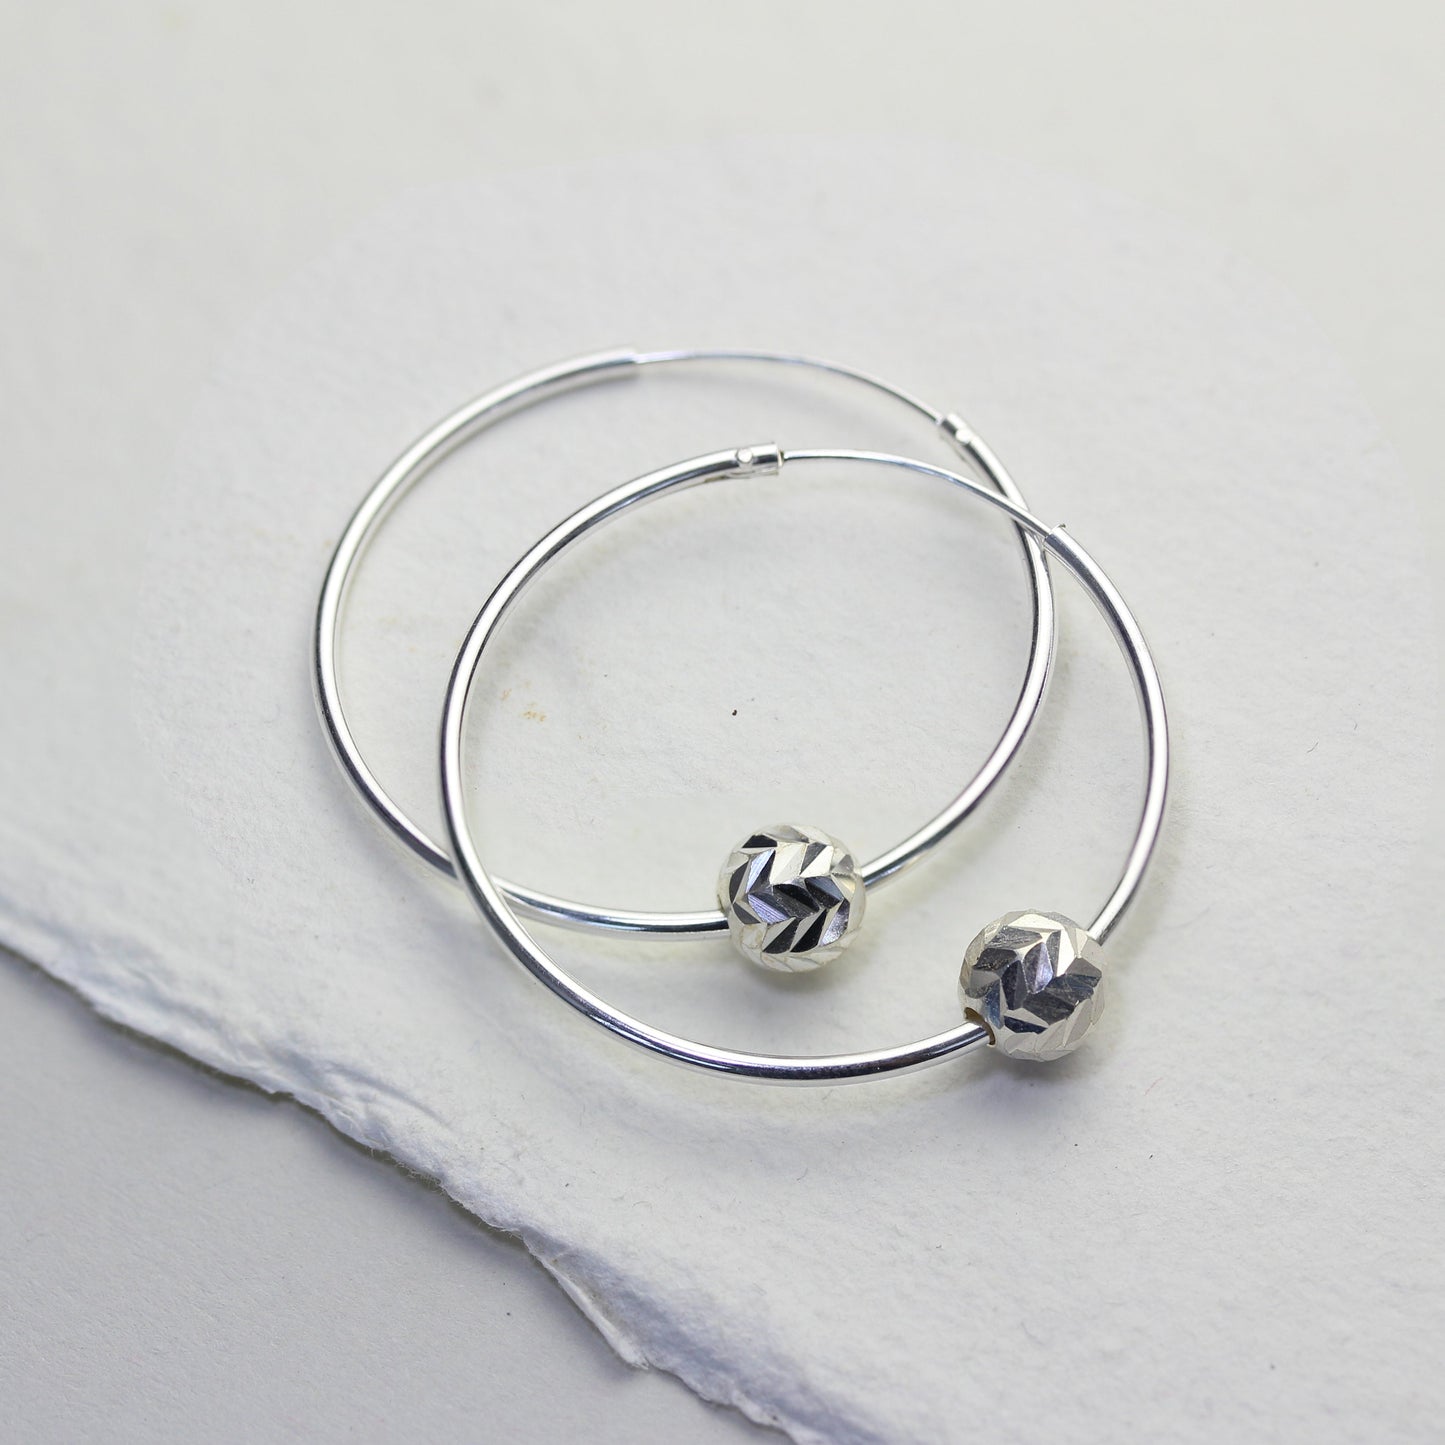 Sterling Silver 22mm Hoop Earrings with Chevron Cut Ball Beads